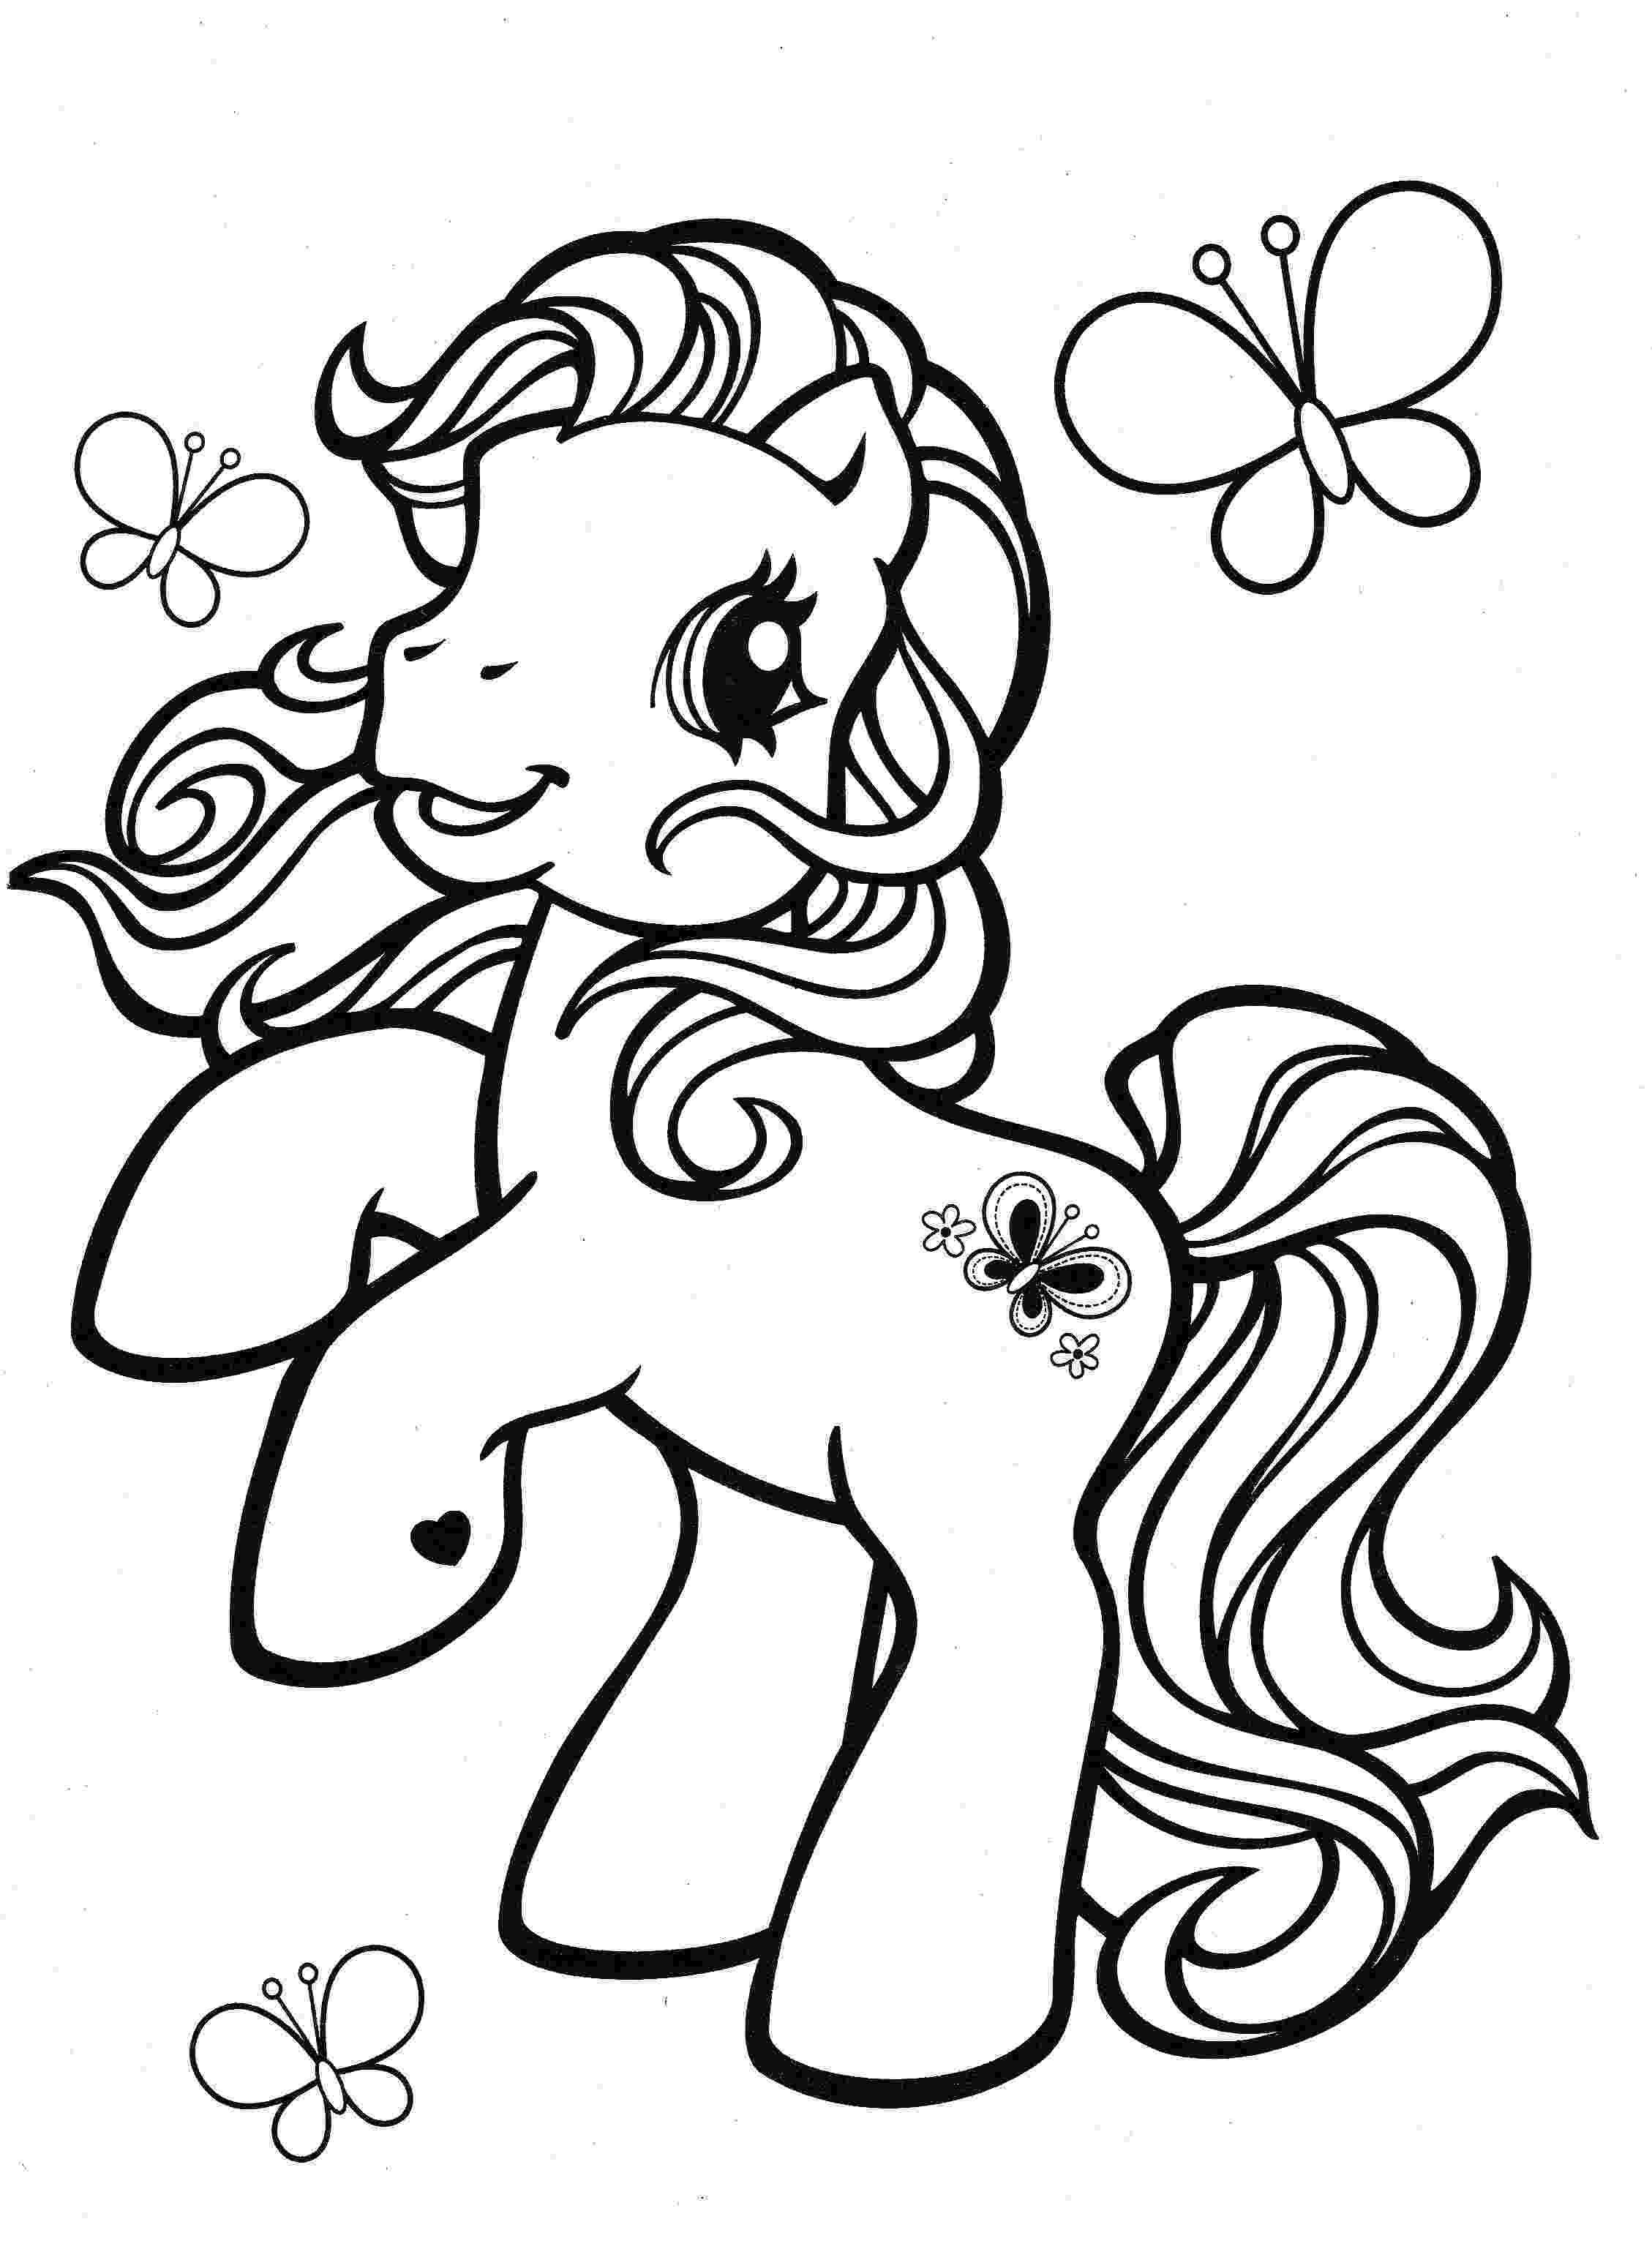 mlp coloring book games my little pony coloring page mlp scootaloo kids my games coloring book mlp 